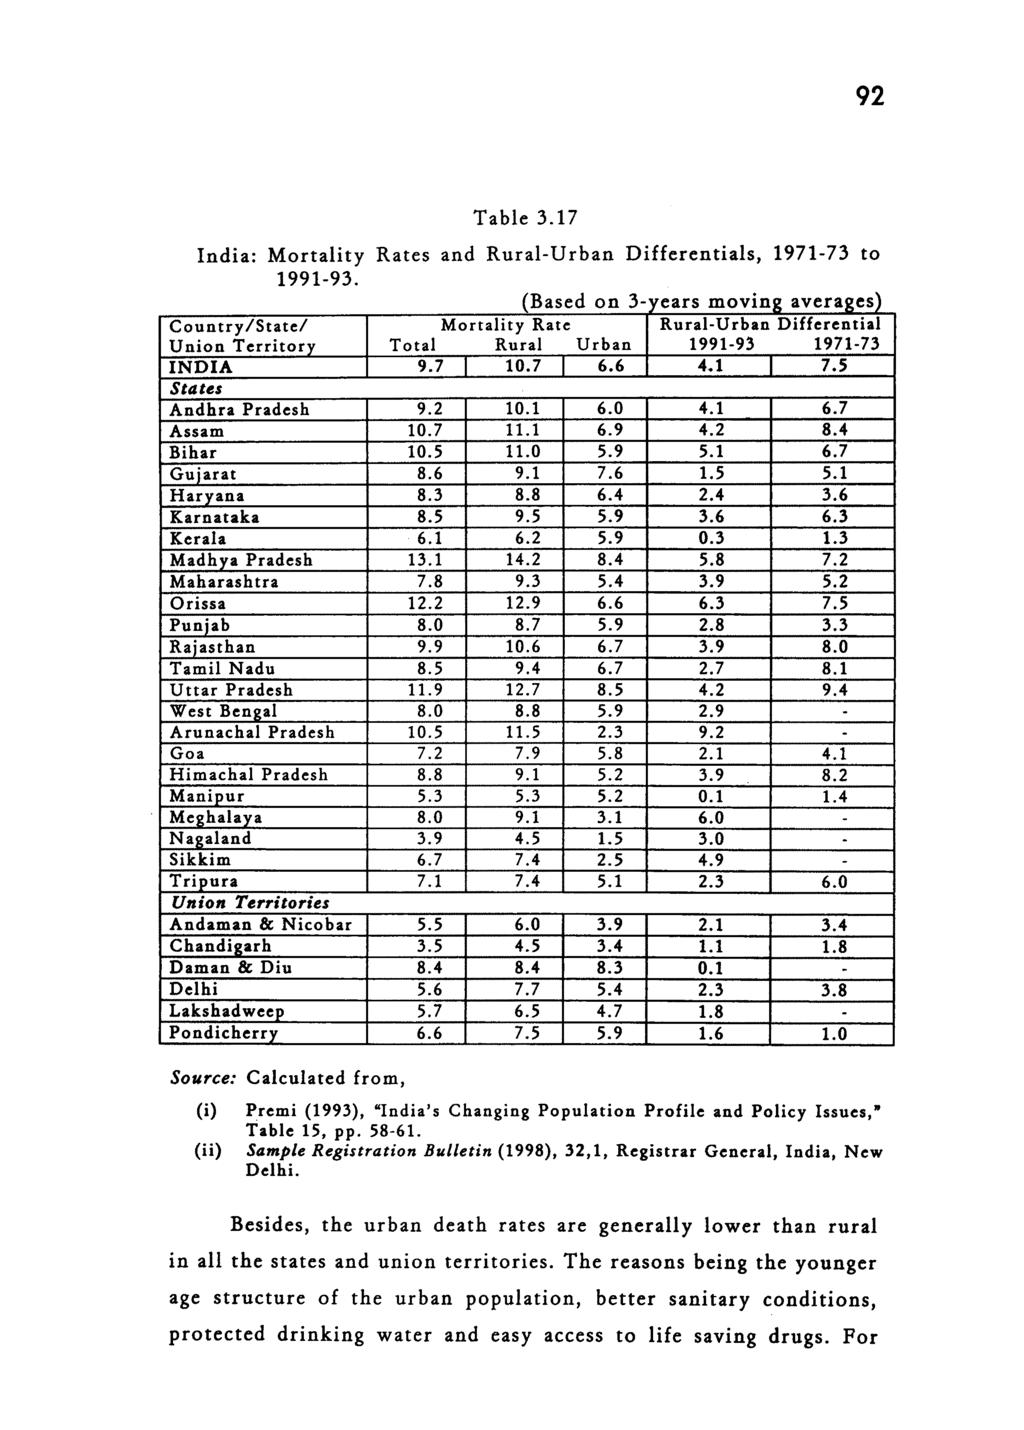 92 Table 3.17 India: Mortality Rates and Rural-Urban Differentials, 1971-73 to 1991-93.